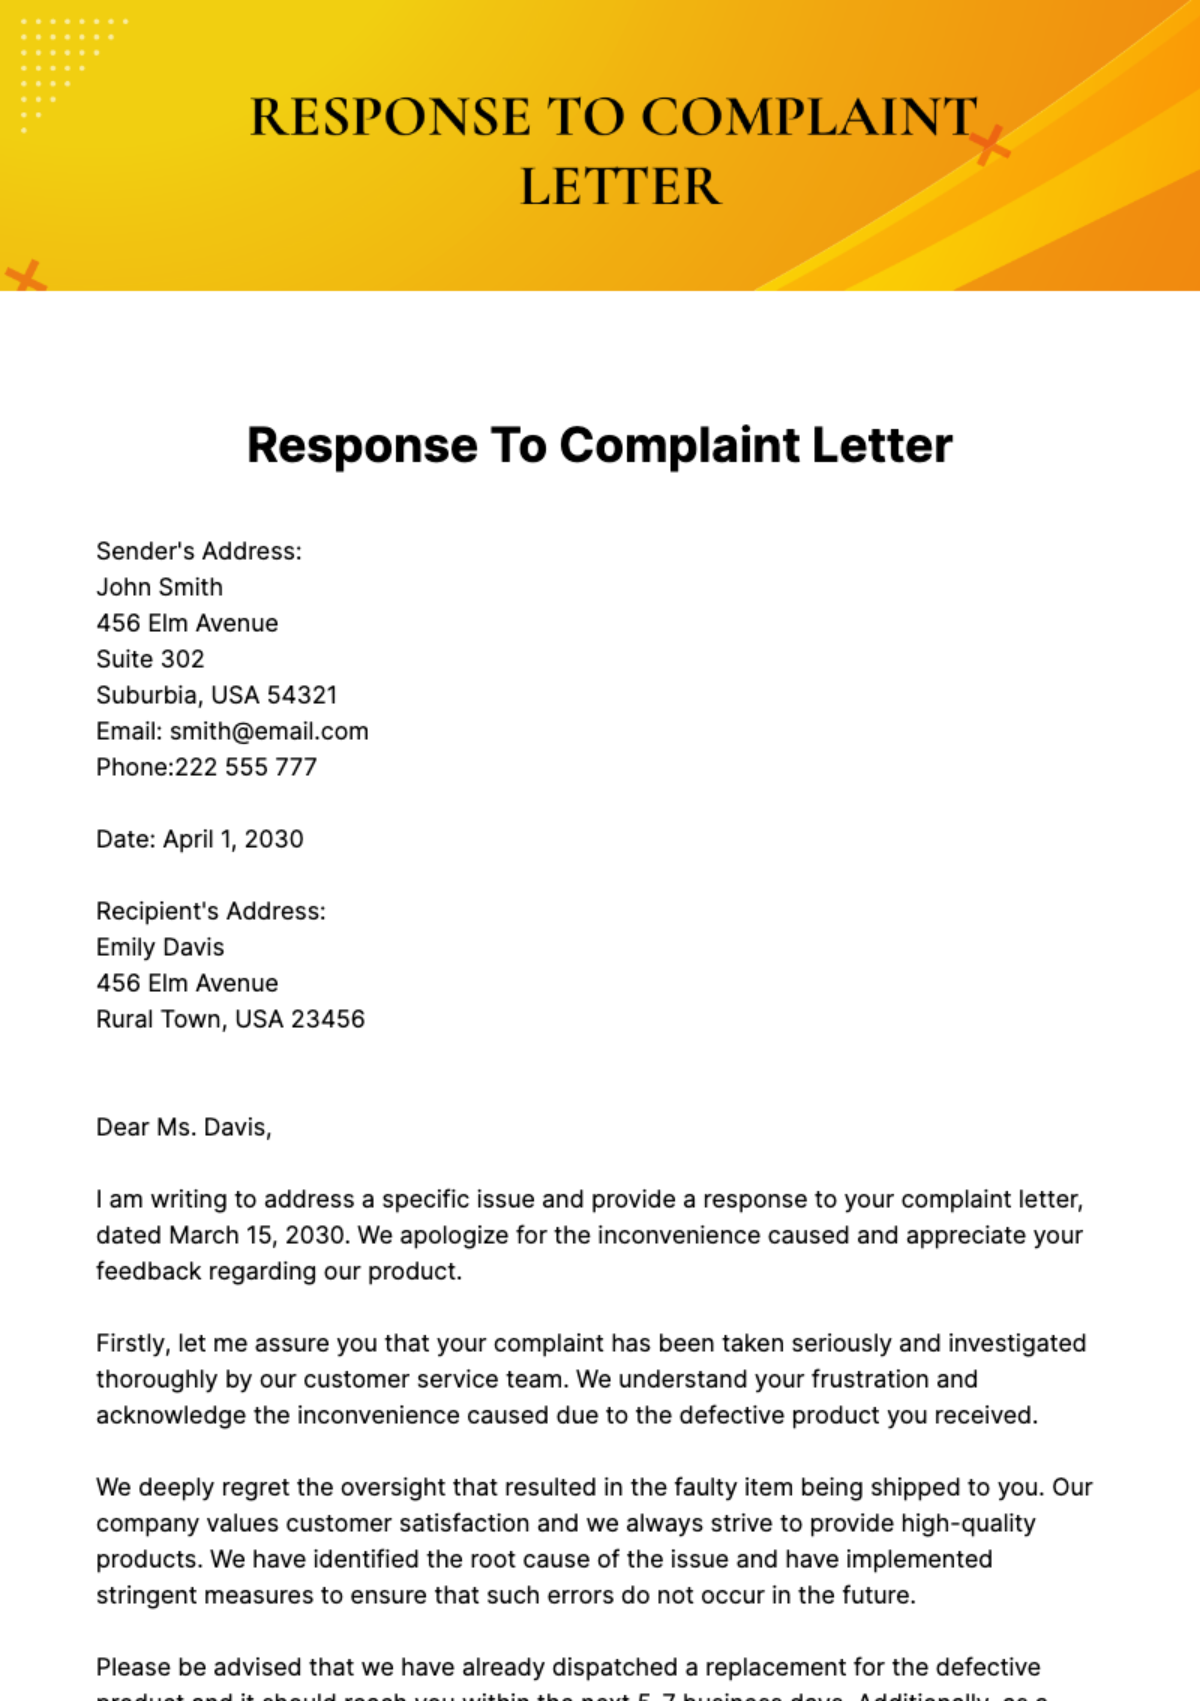 Free Response To Complaint Letter Template